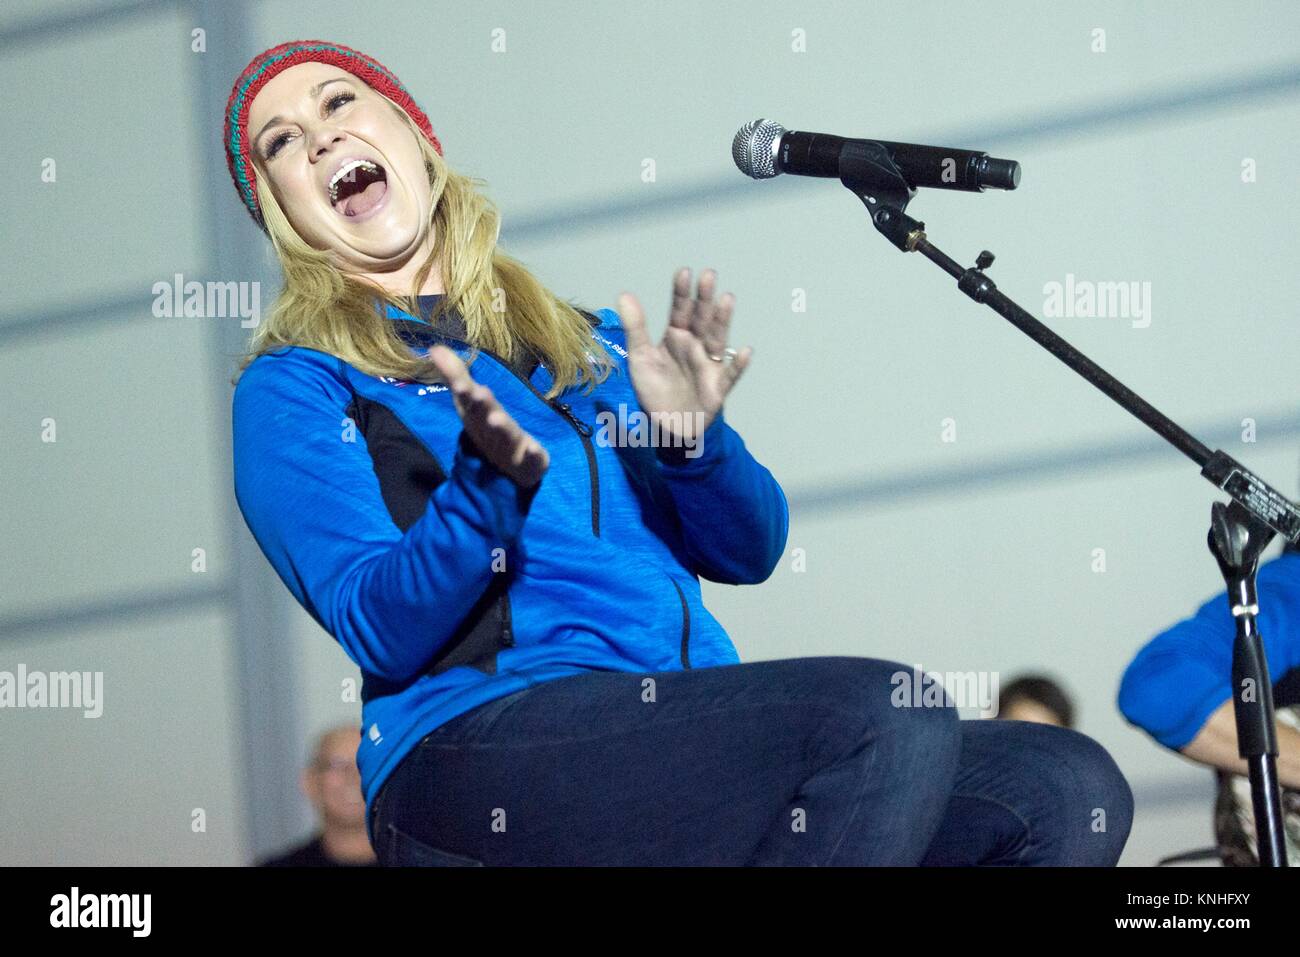 Country music singer Kellie Pickler performs for U.S. troops during the CJCS USO Holiday Tour December 25, 2016 in Iraq. (photo by PO2 Dominique A. Pineiro  via Planetpix) Stock Photo